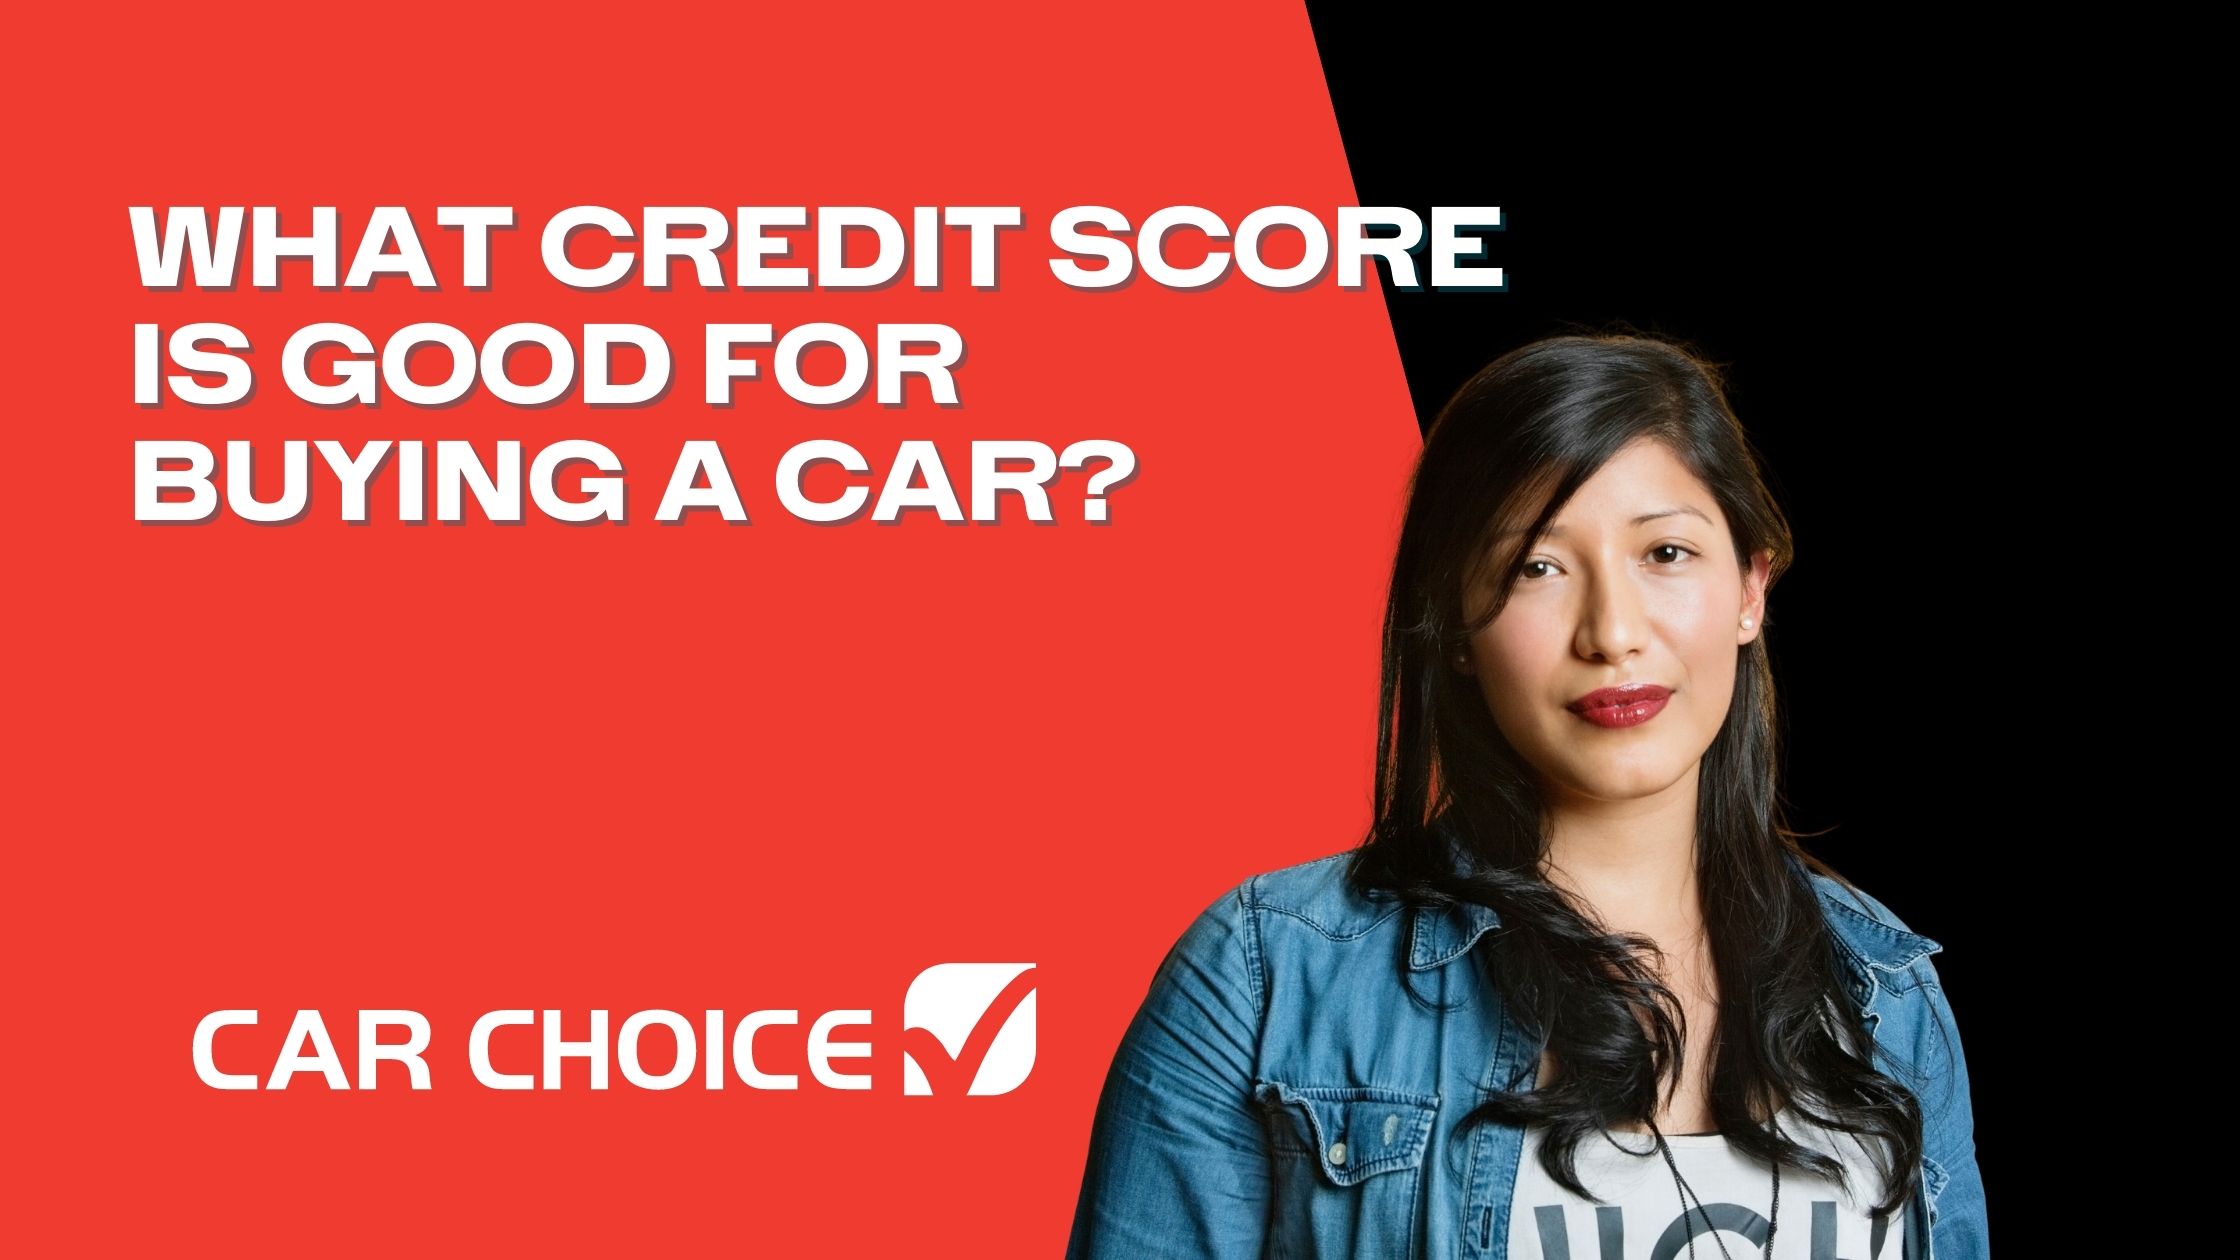 What Credit Score Is Good for Buying a Car?